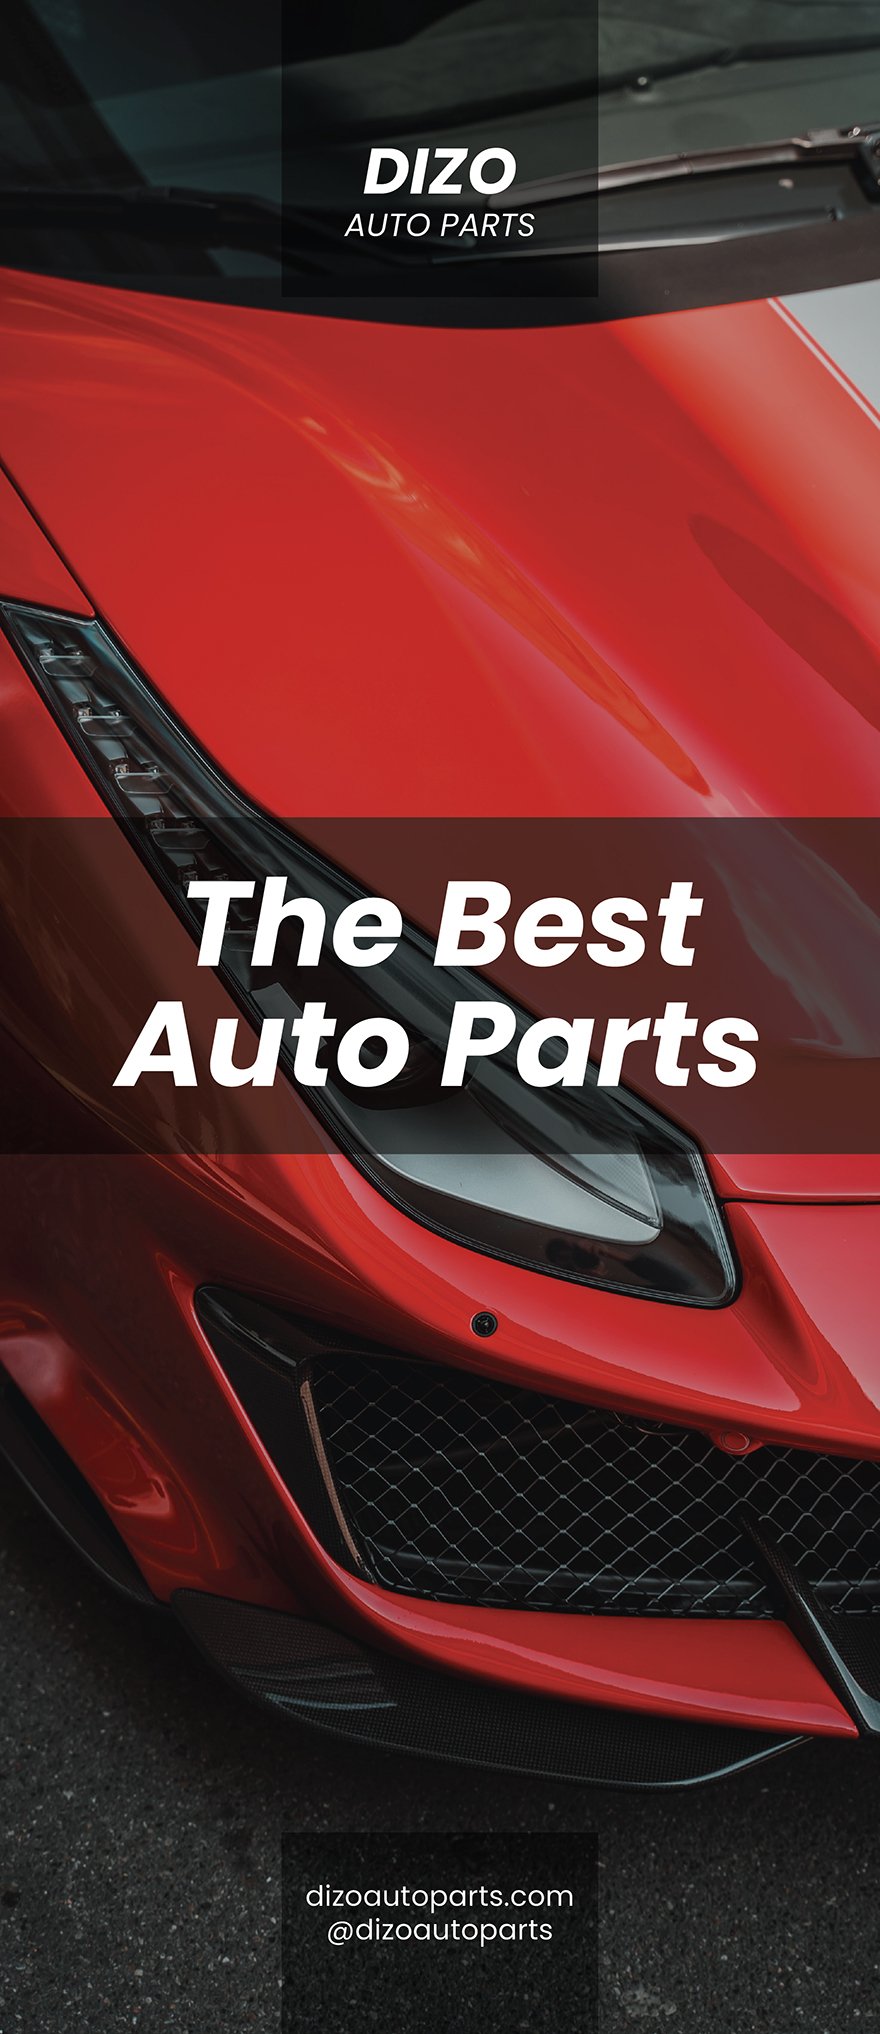 Free Auto Parts Roll Up Banner Template in Word, Google Docs, Publisher